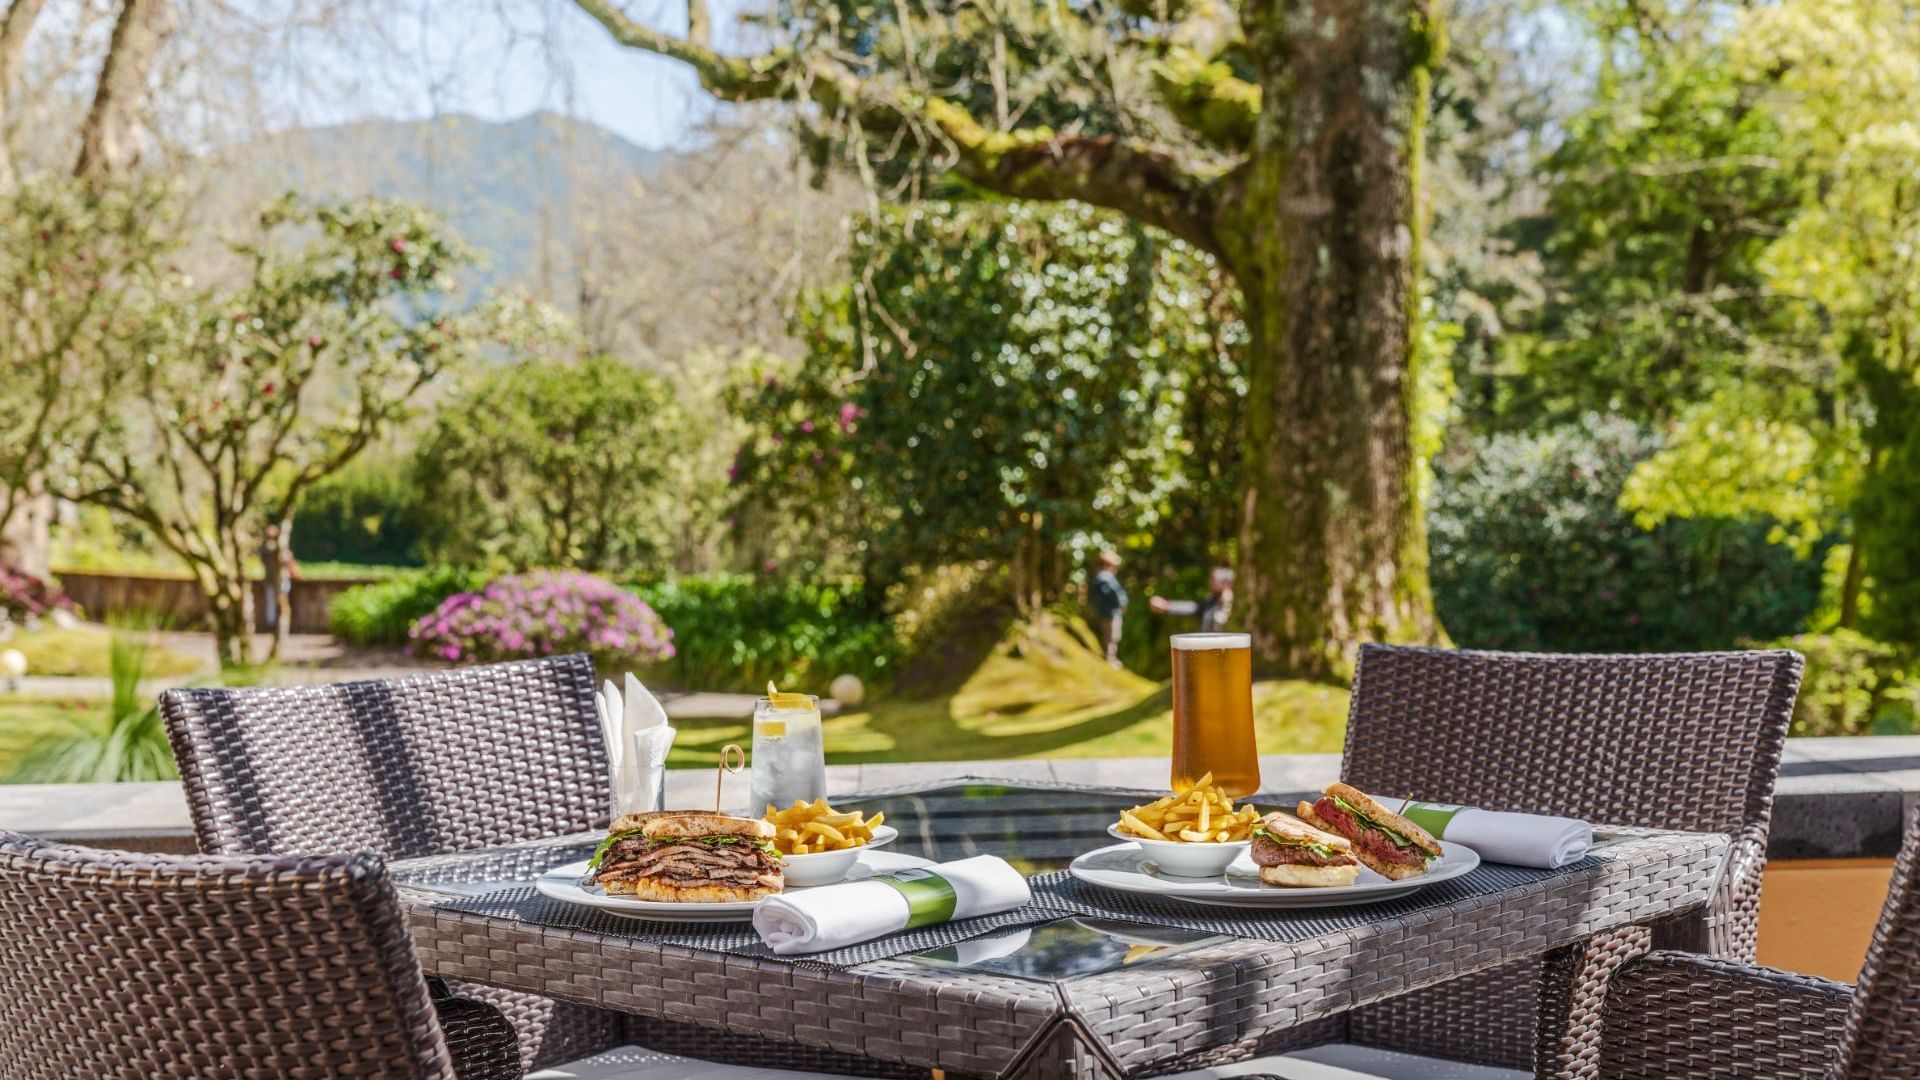 Burgers with a side of fries & beer served in The Gardner at Terra Nostra Garden Hotel